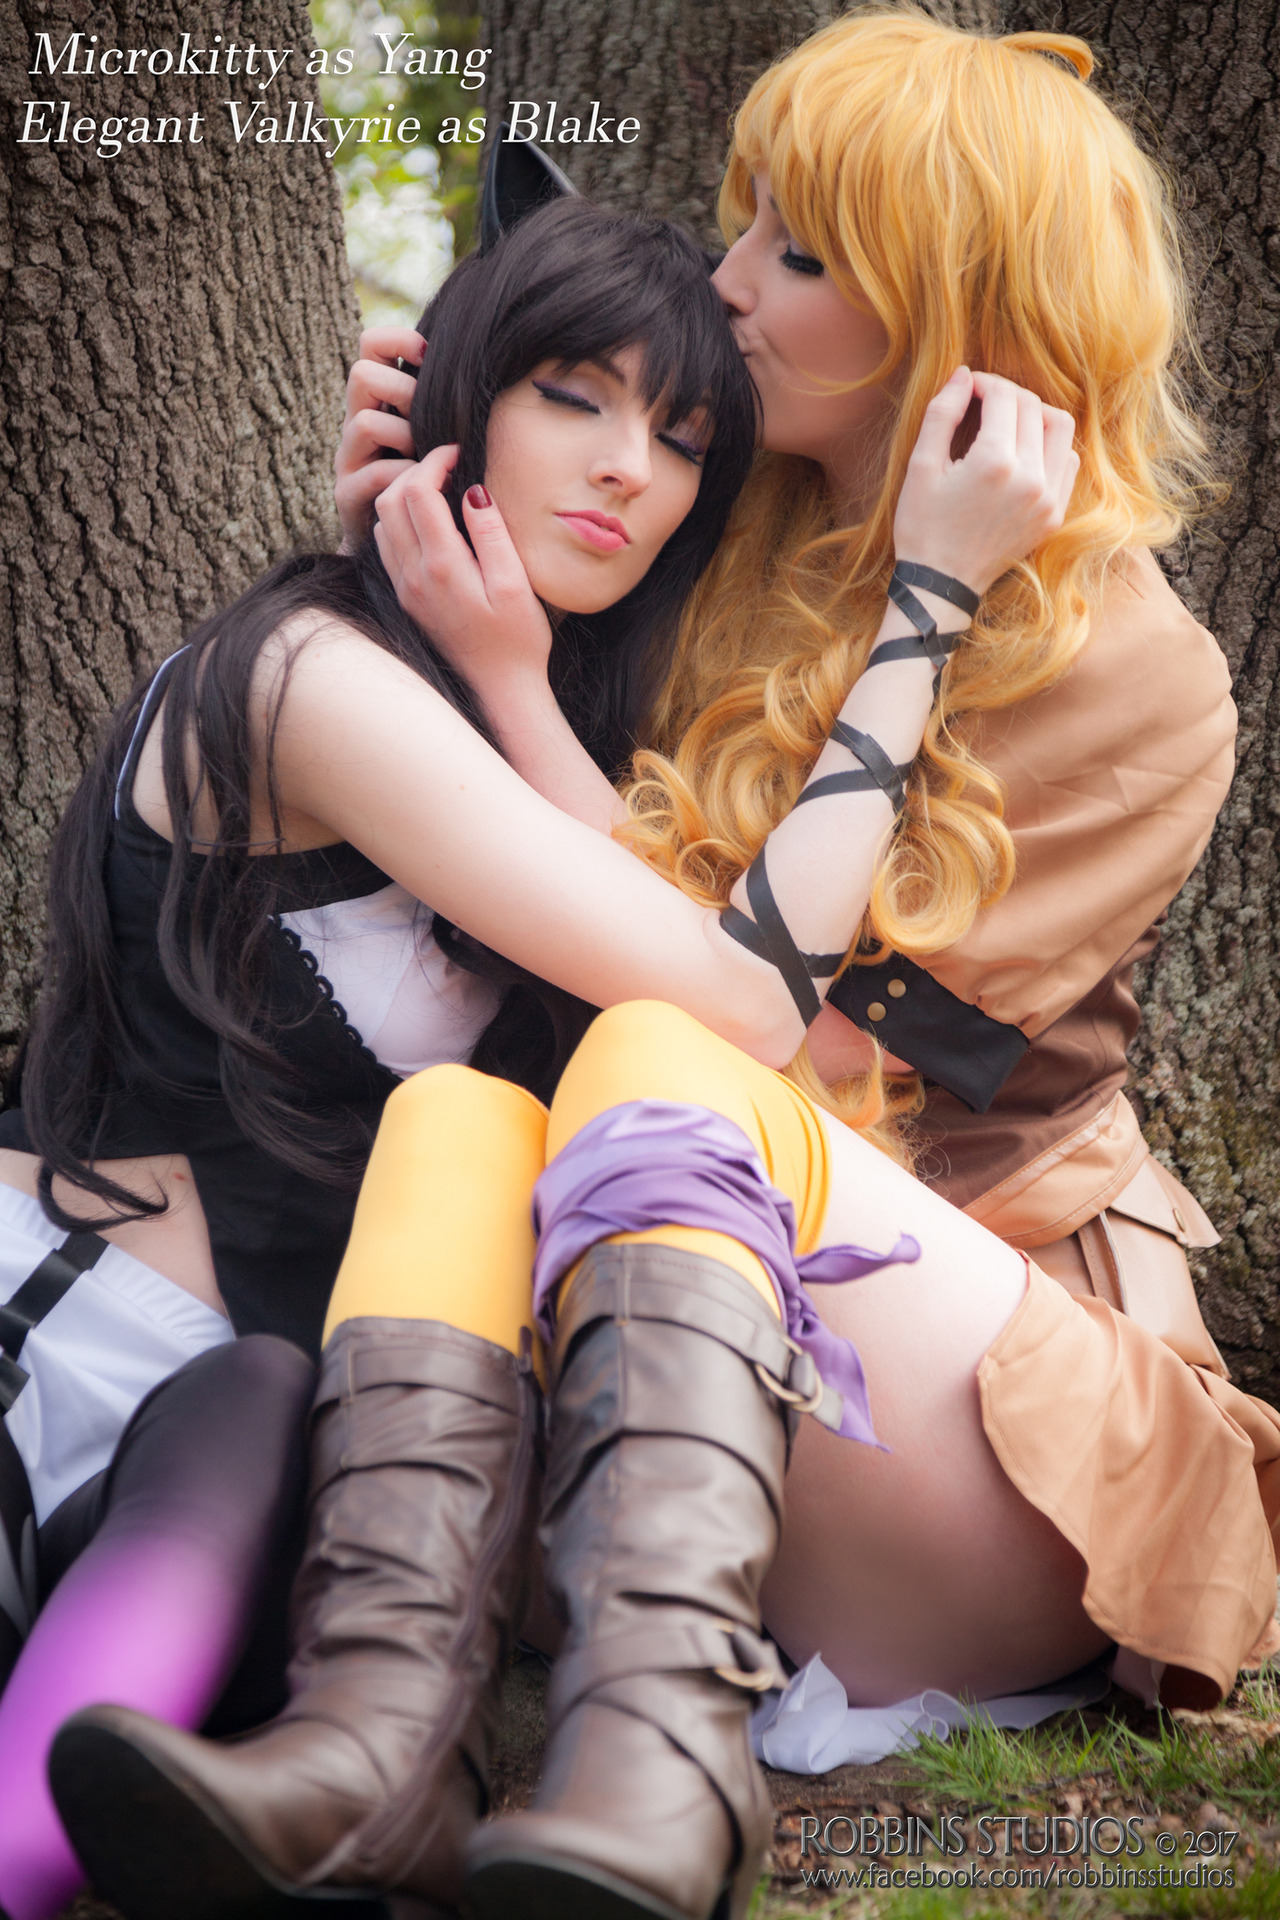 Hey friends!just another reminder about duo sets!They will all be available until